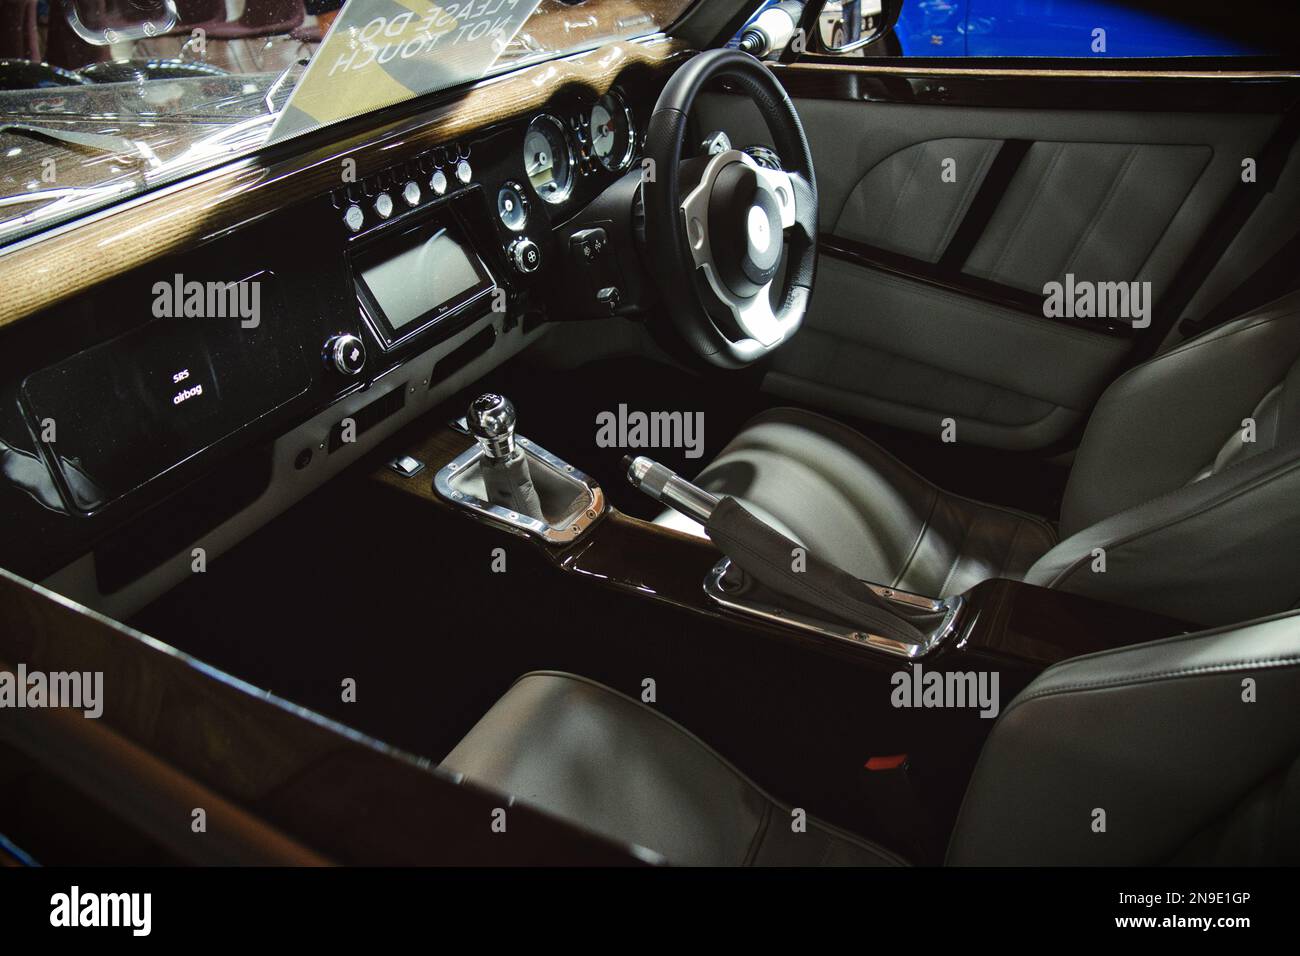 A close-up shot of the inside and the steering wheel of the Morgan Aero 8 sports car Stock Photo